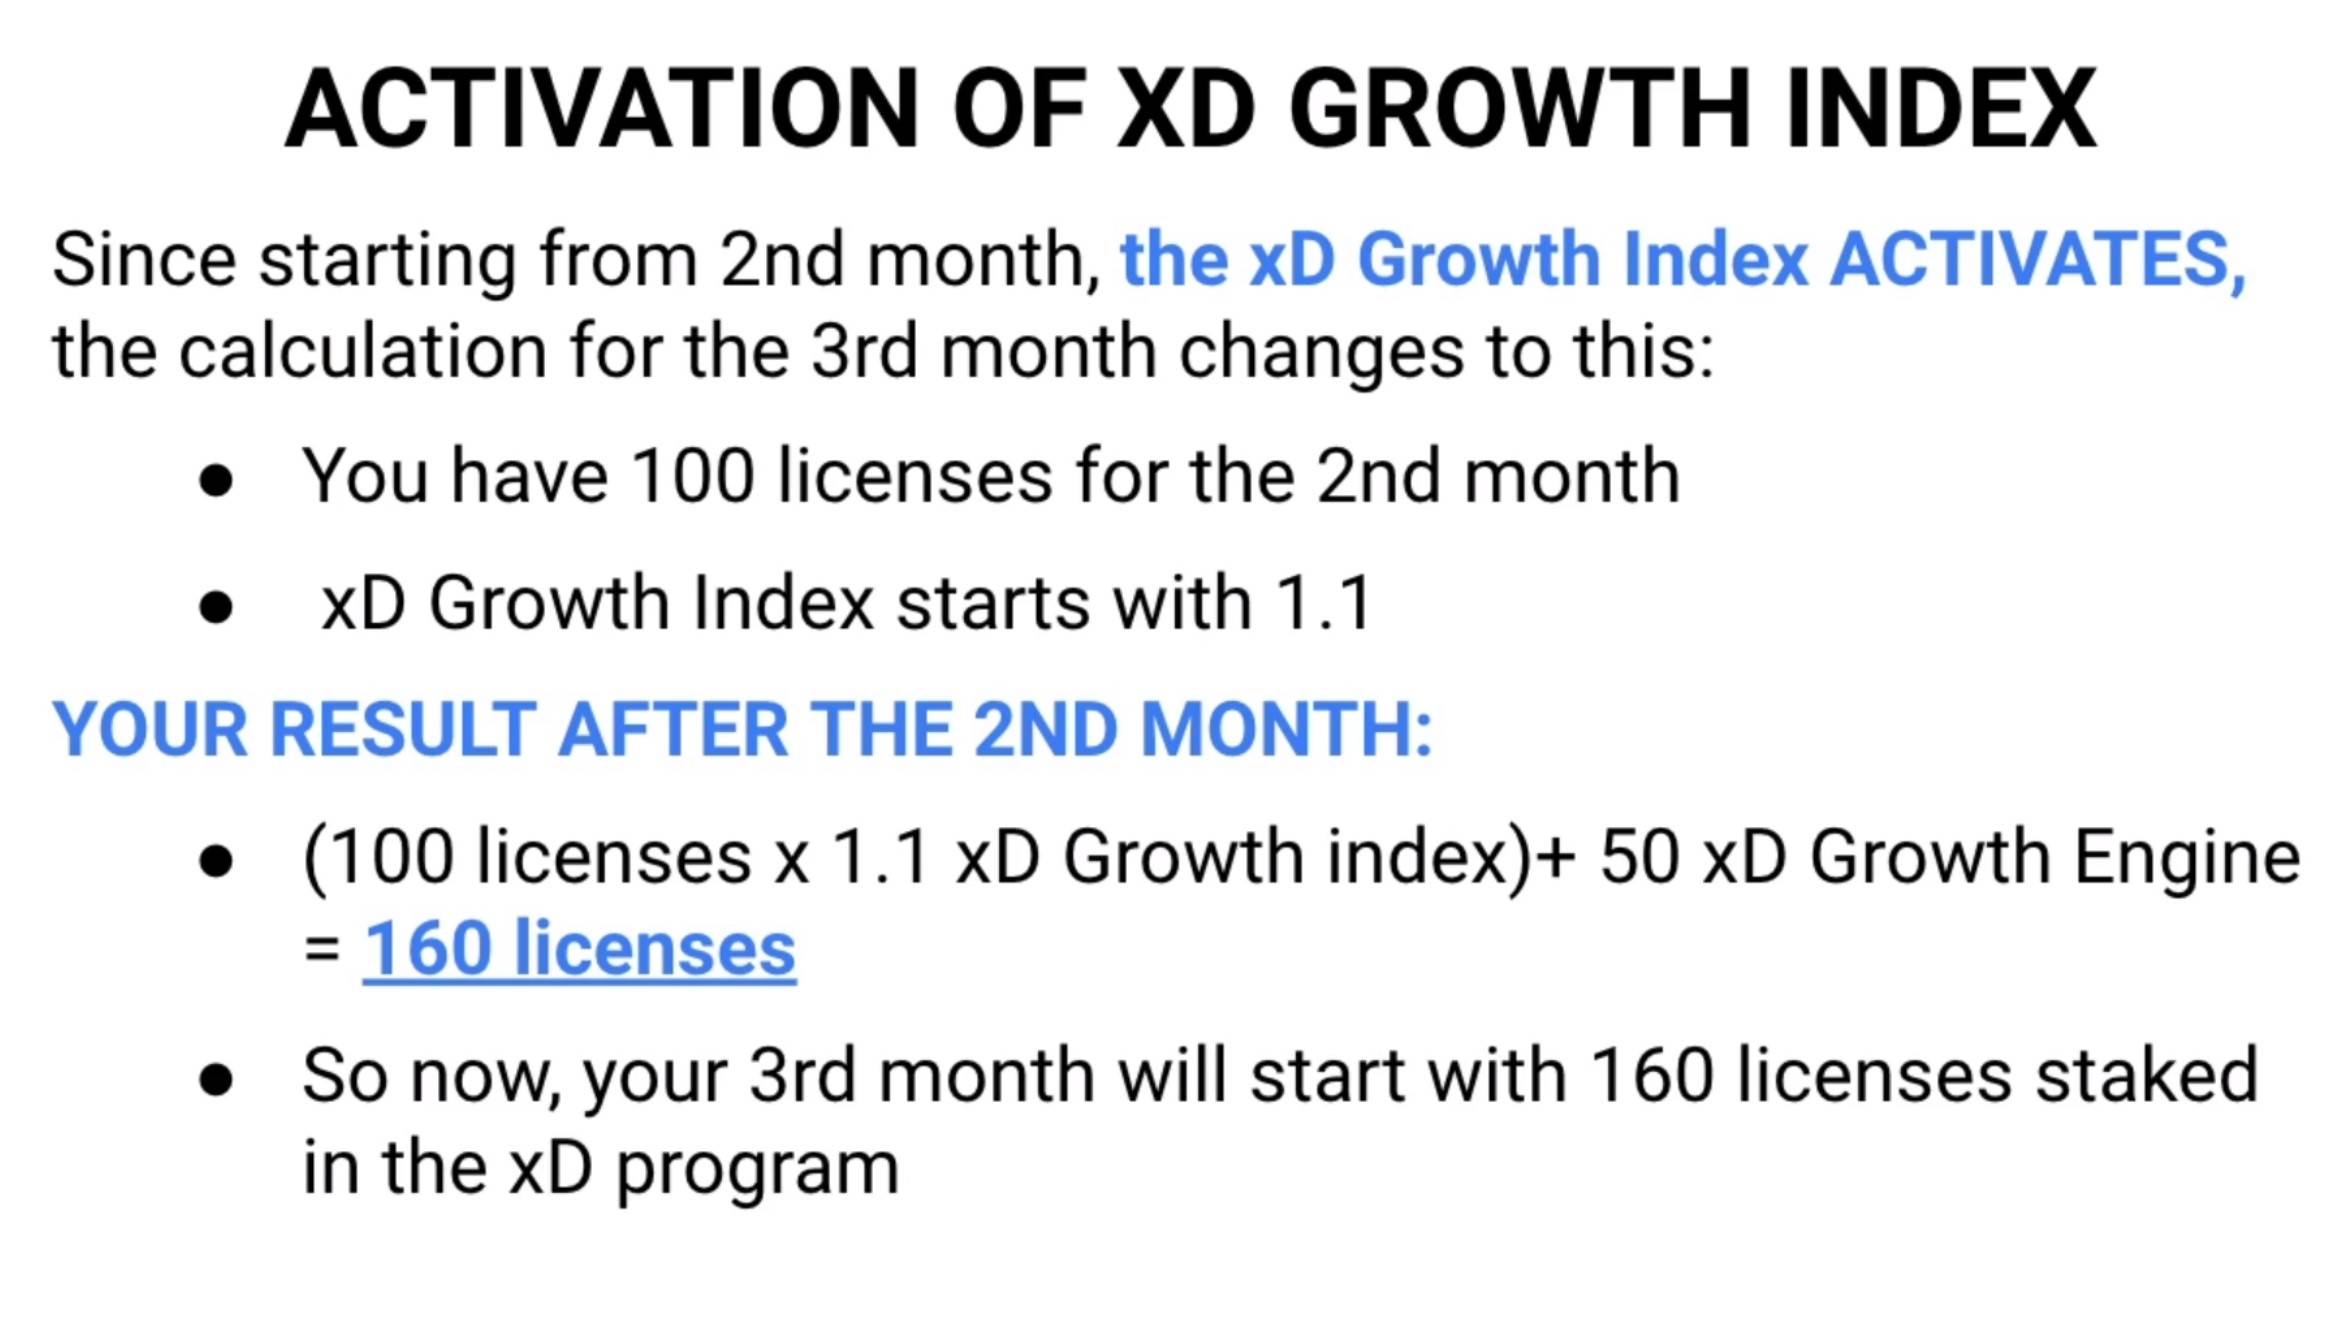 Activation of xD Growth Index